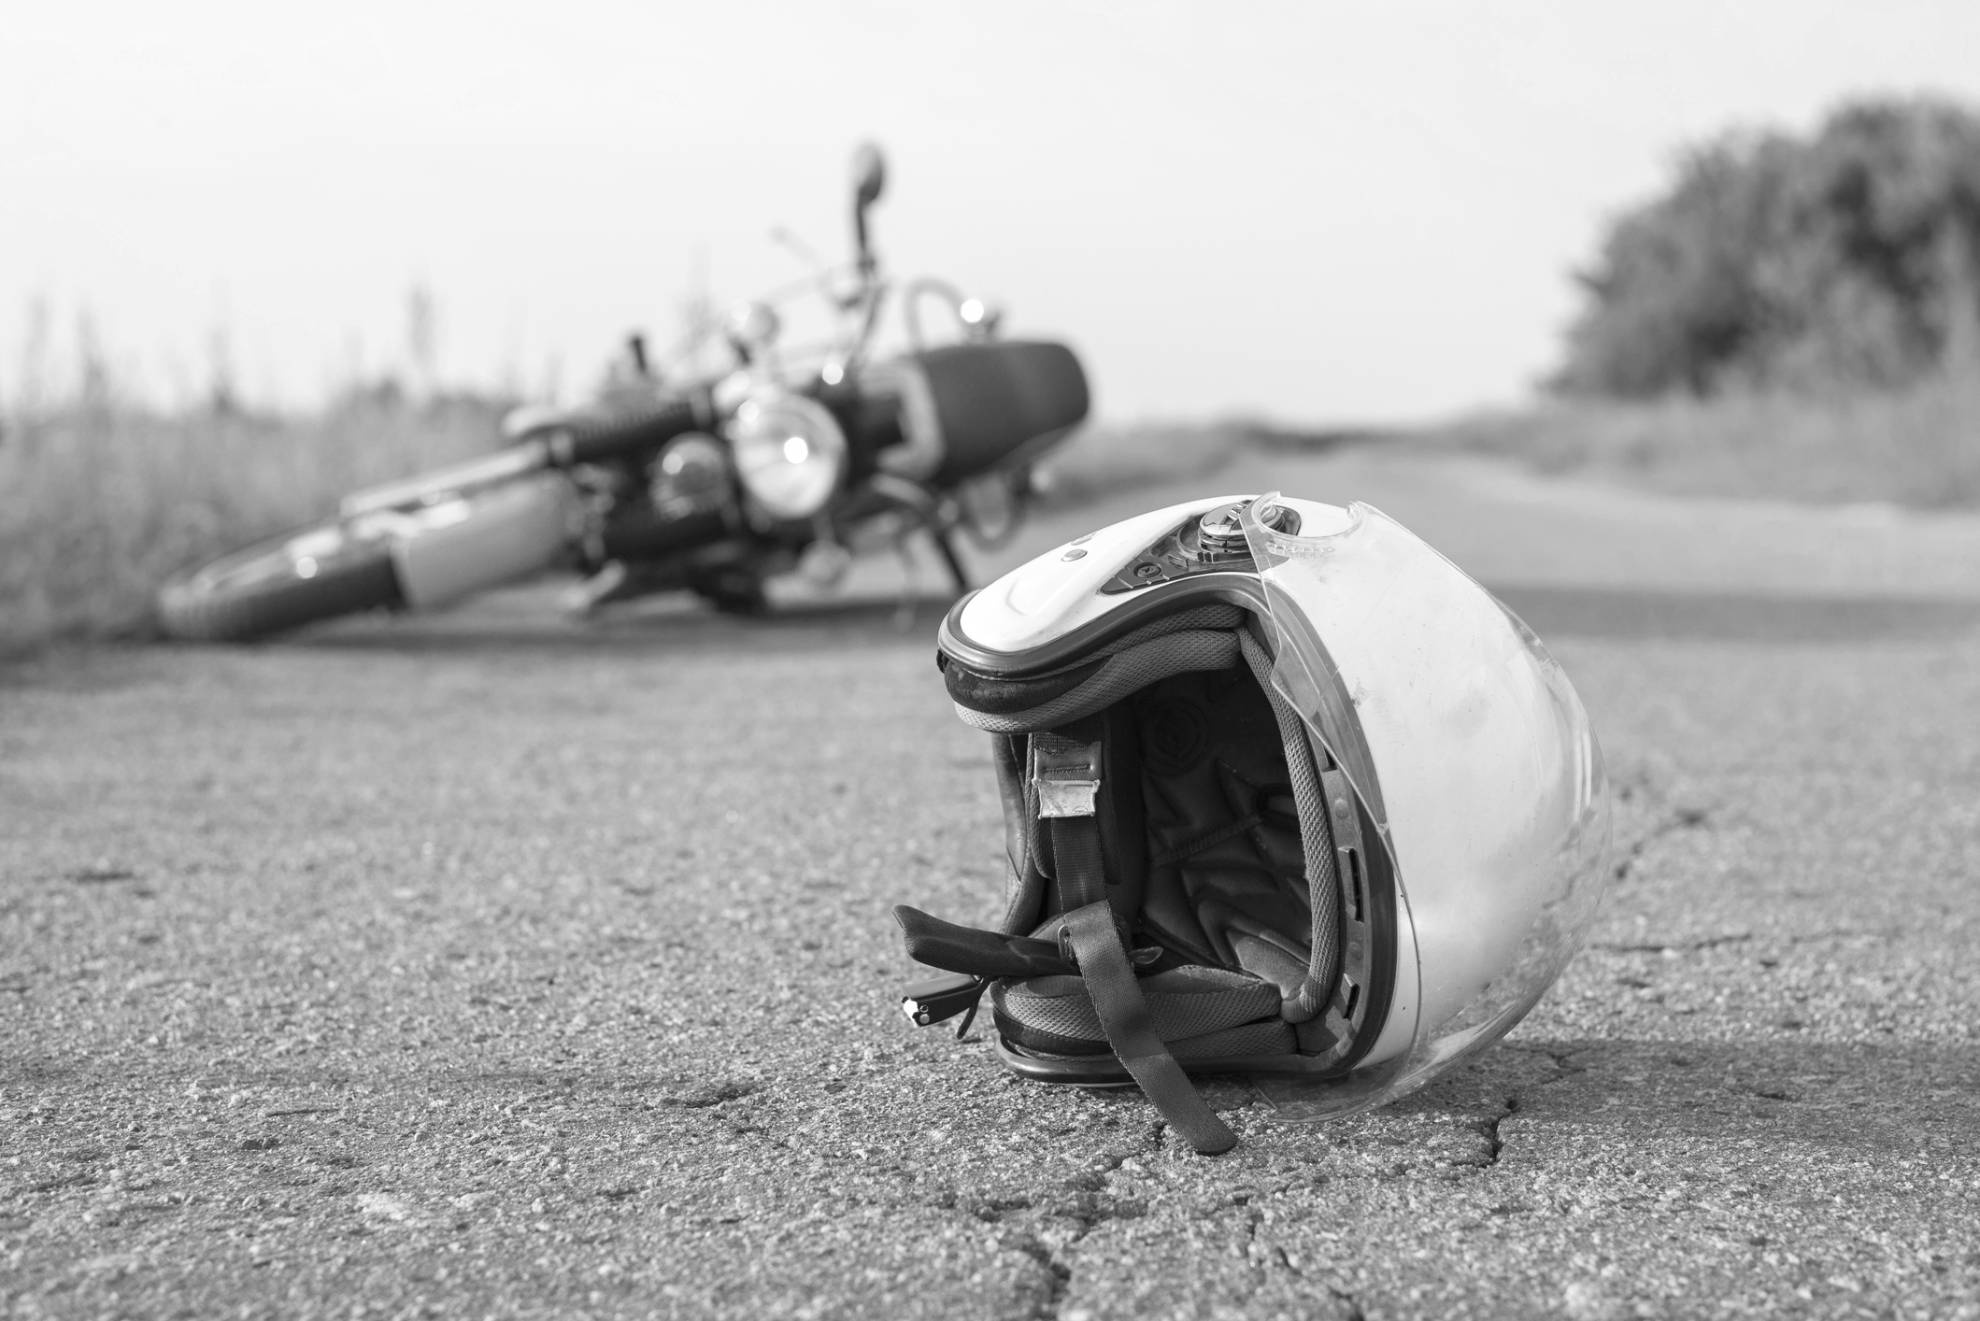 H&E Personal Injury Attorneys | What We Do - Motorcycle Wreck